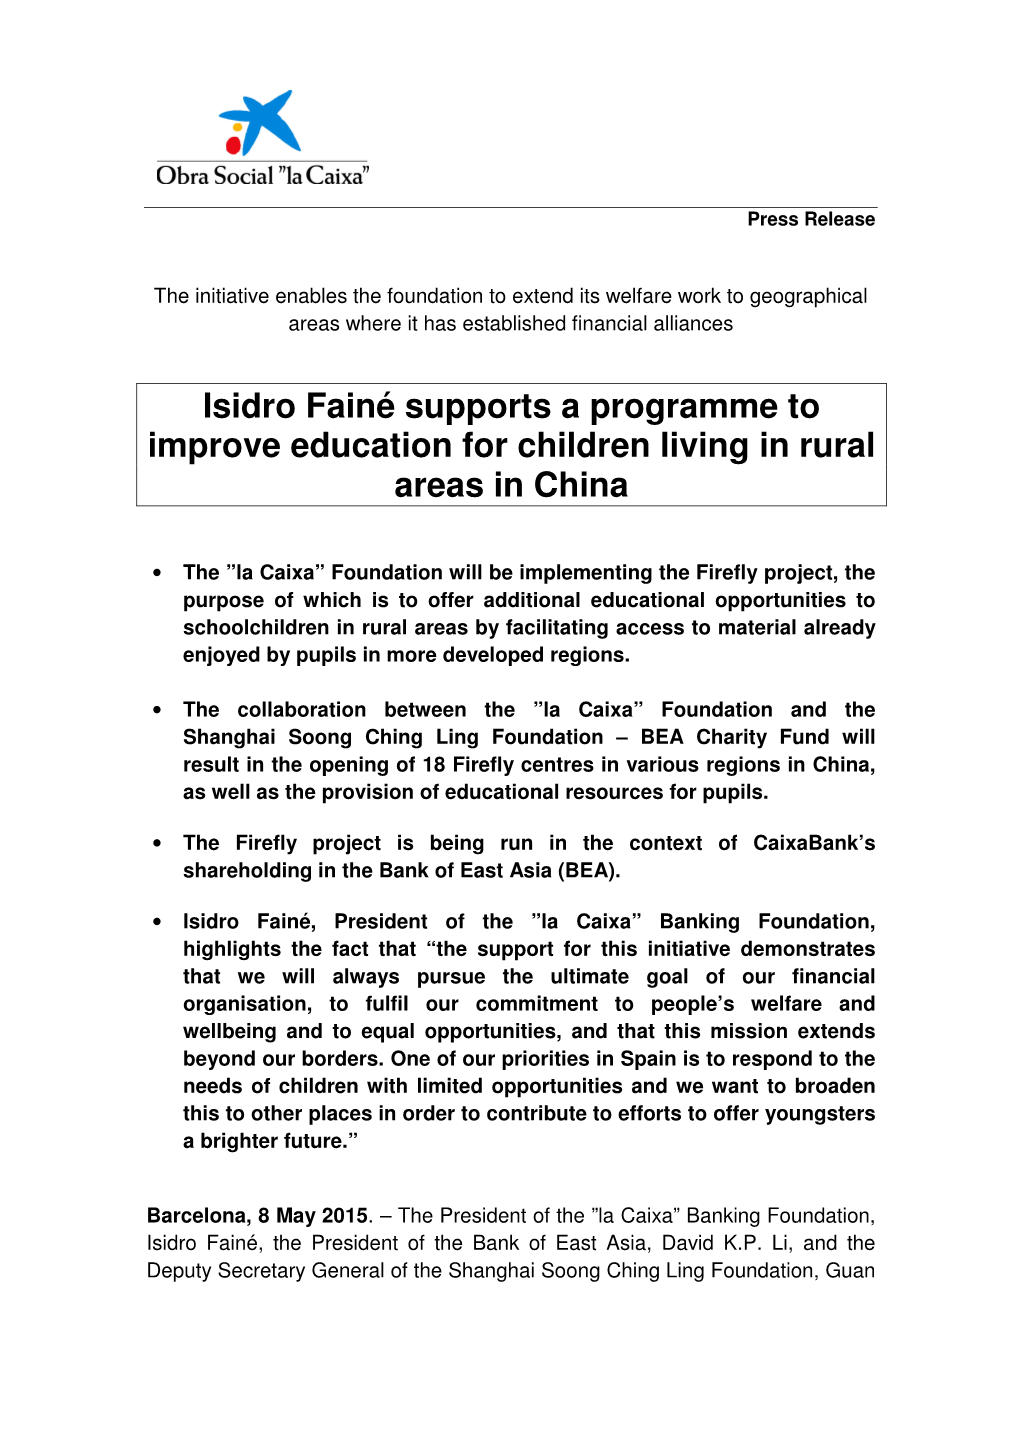 Isidro Fainé Supports a Programme to Improve Education for Children Living in Rural Areas in China